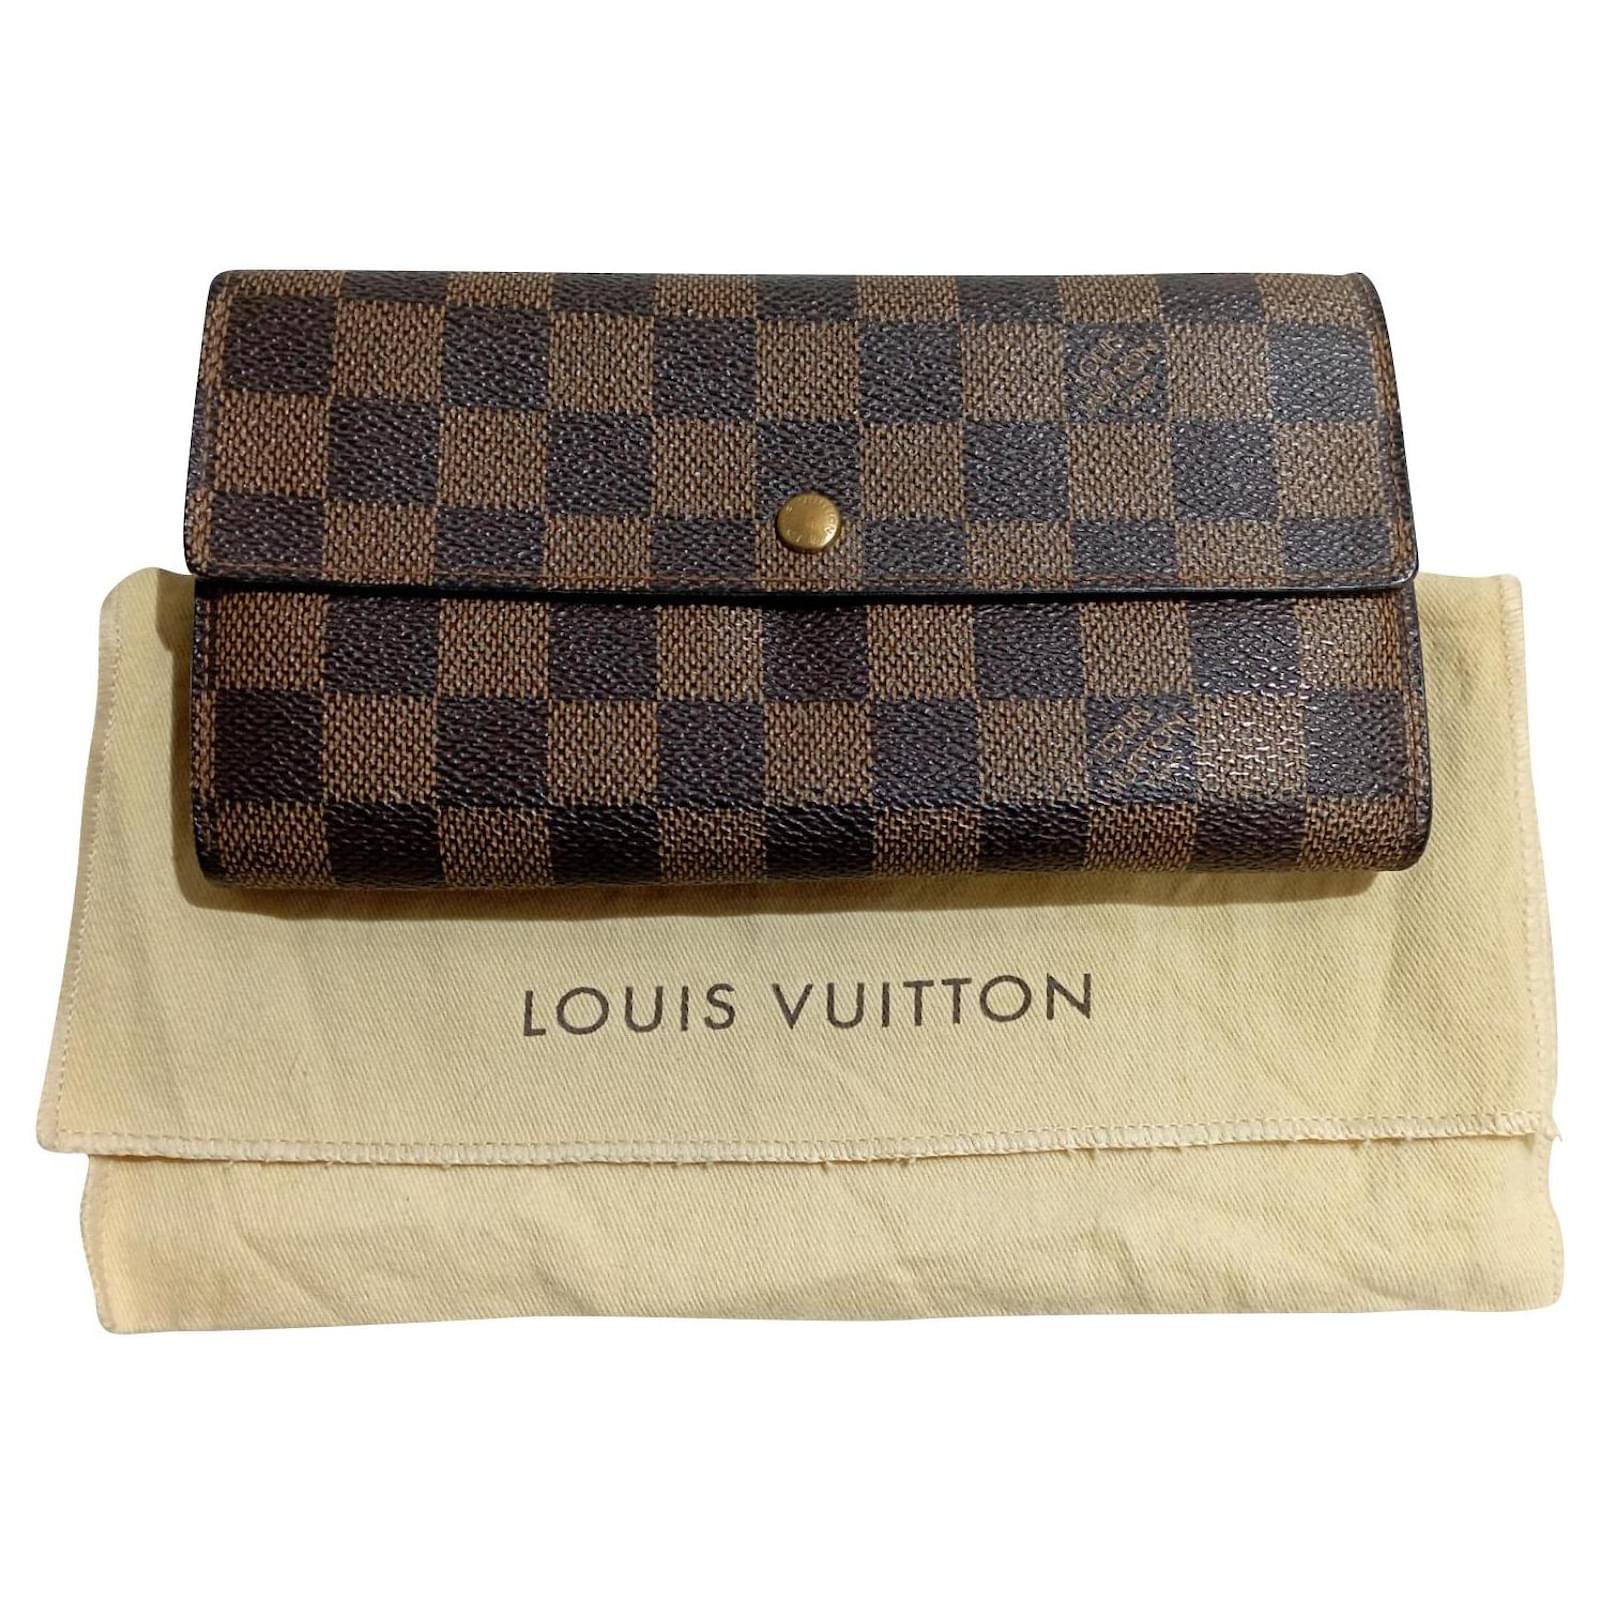 Limited Edition Louis Vuitton Damier Azur Complice Trunks and Bags